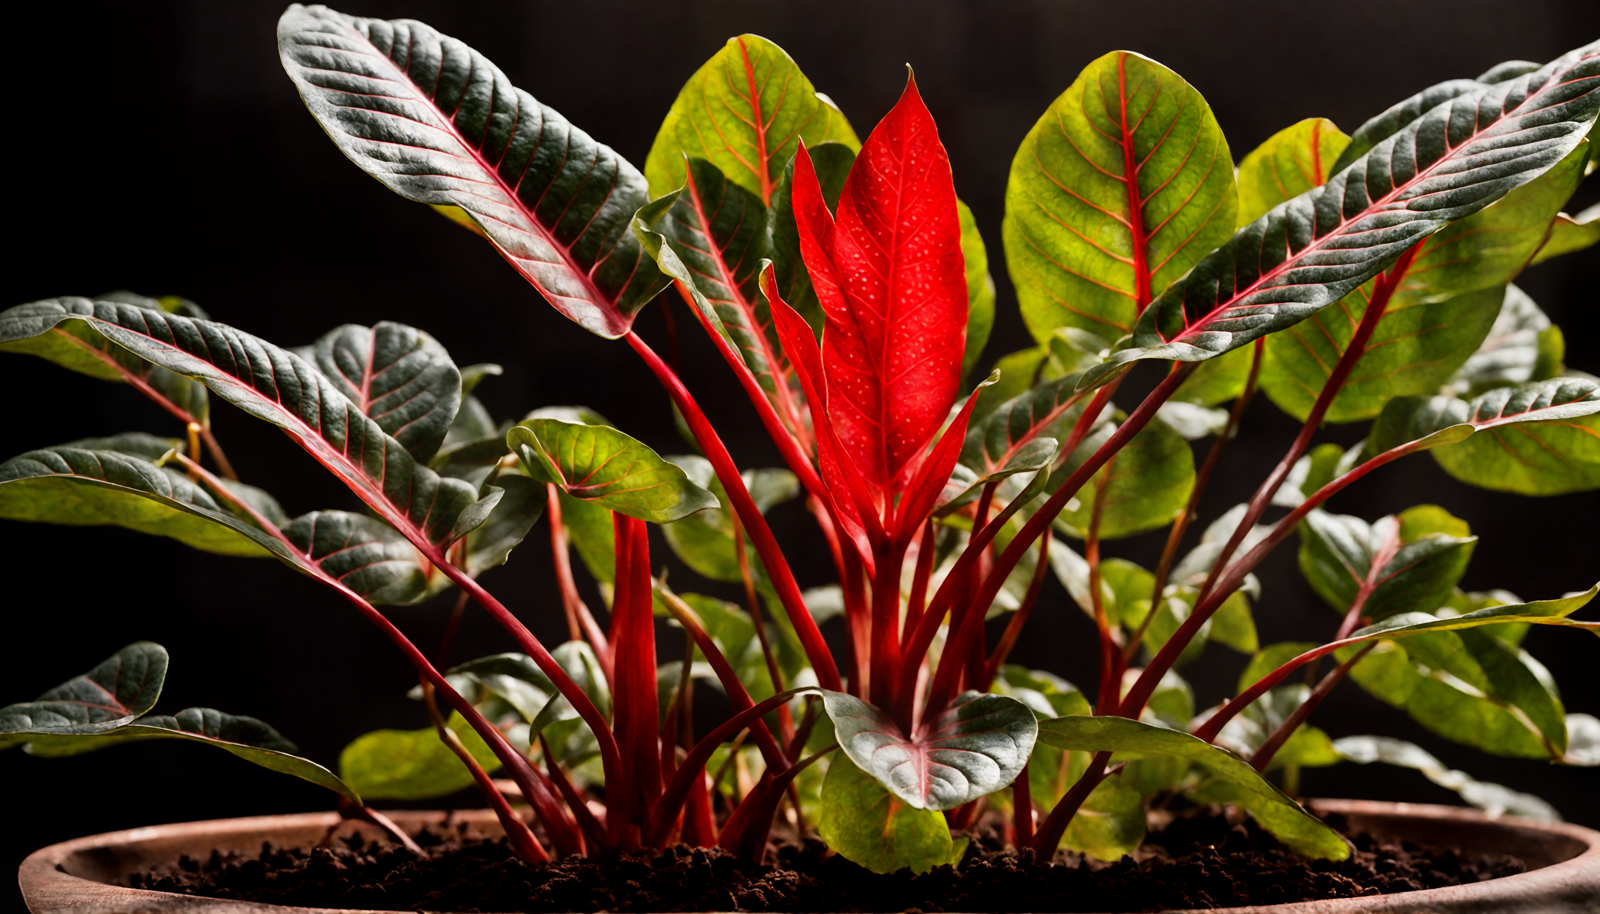 Caladium bicolor with vibrant red leaves and green veins, in a planter, against a dark background.